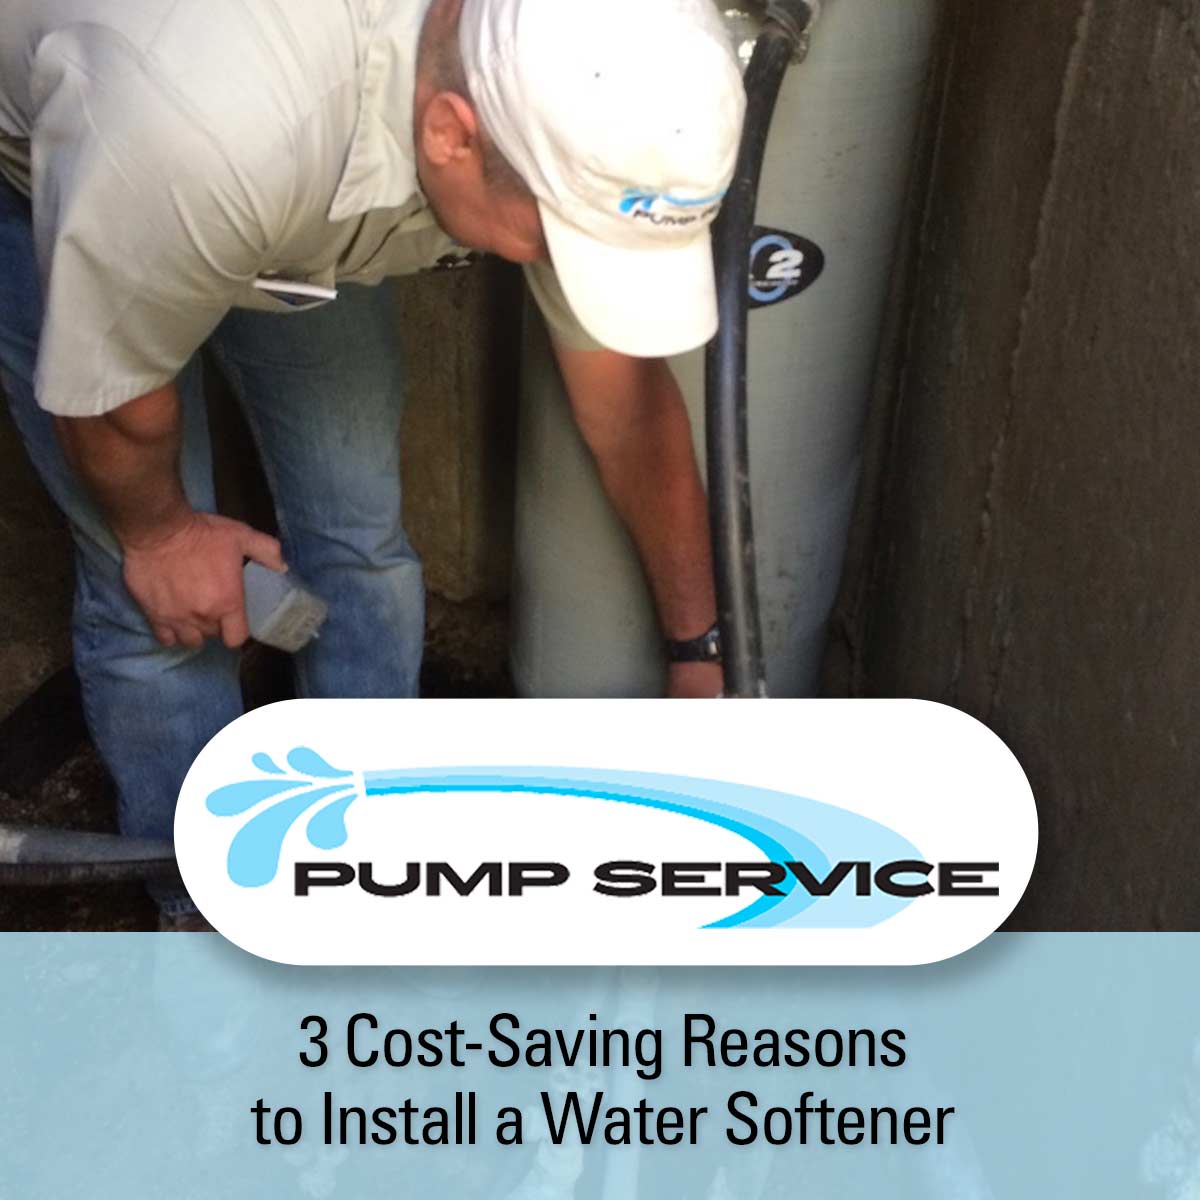 3 Cost-Saving Reasons to Install a Water Softener